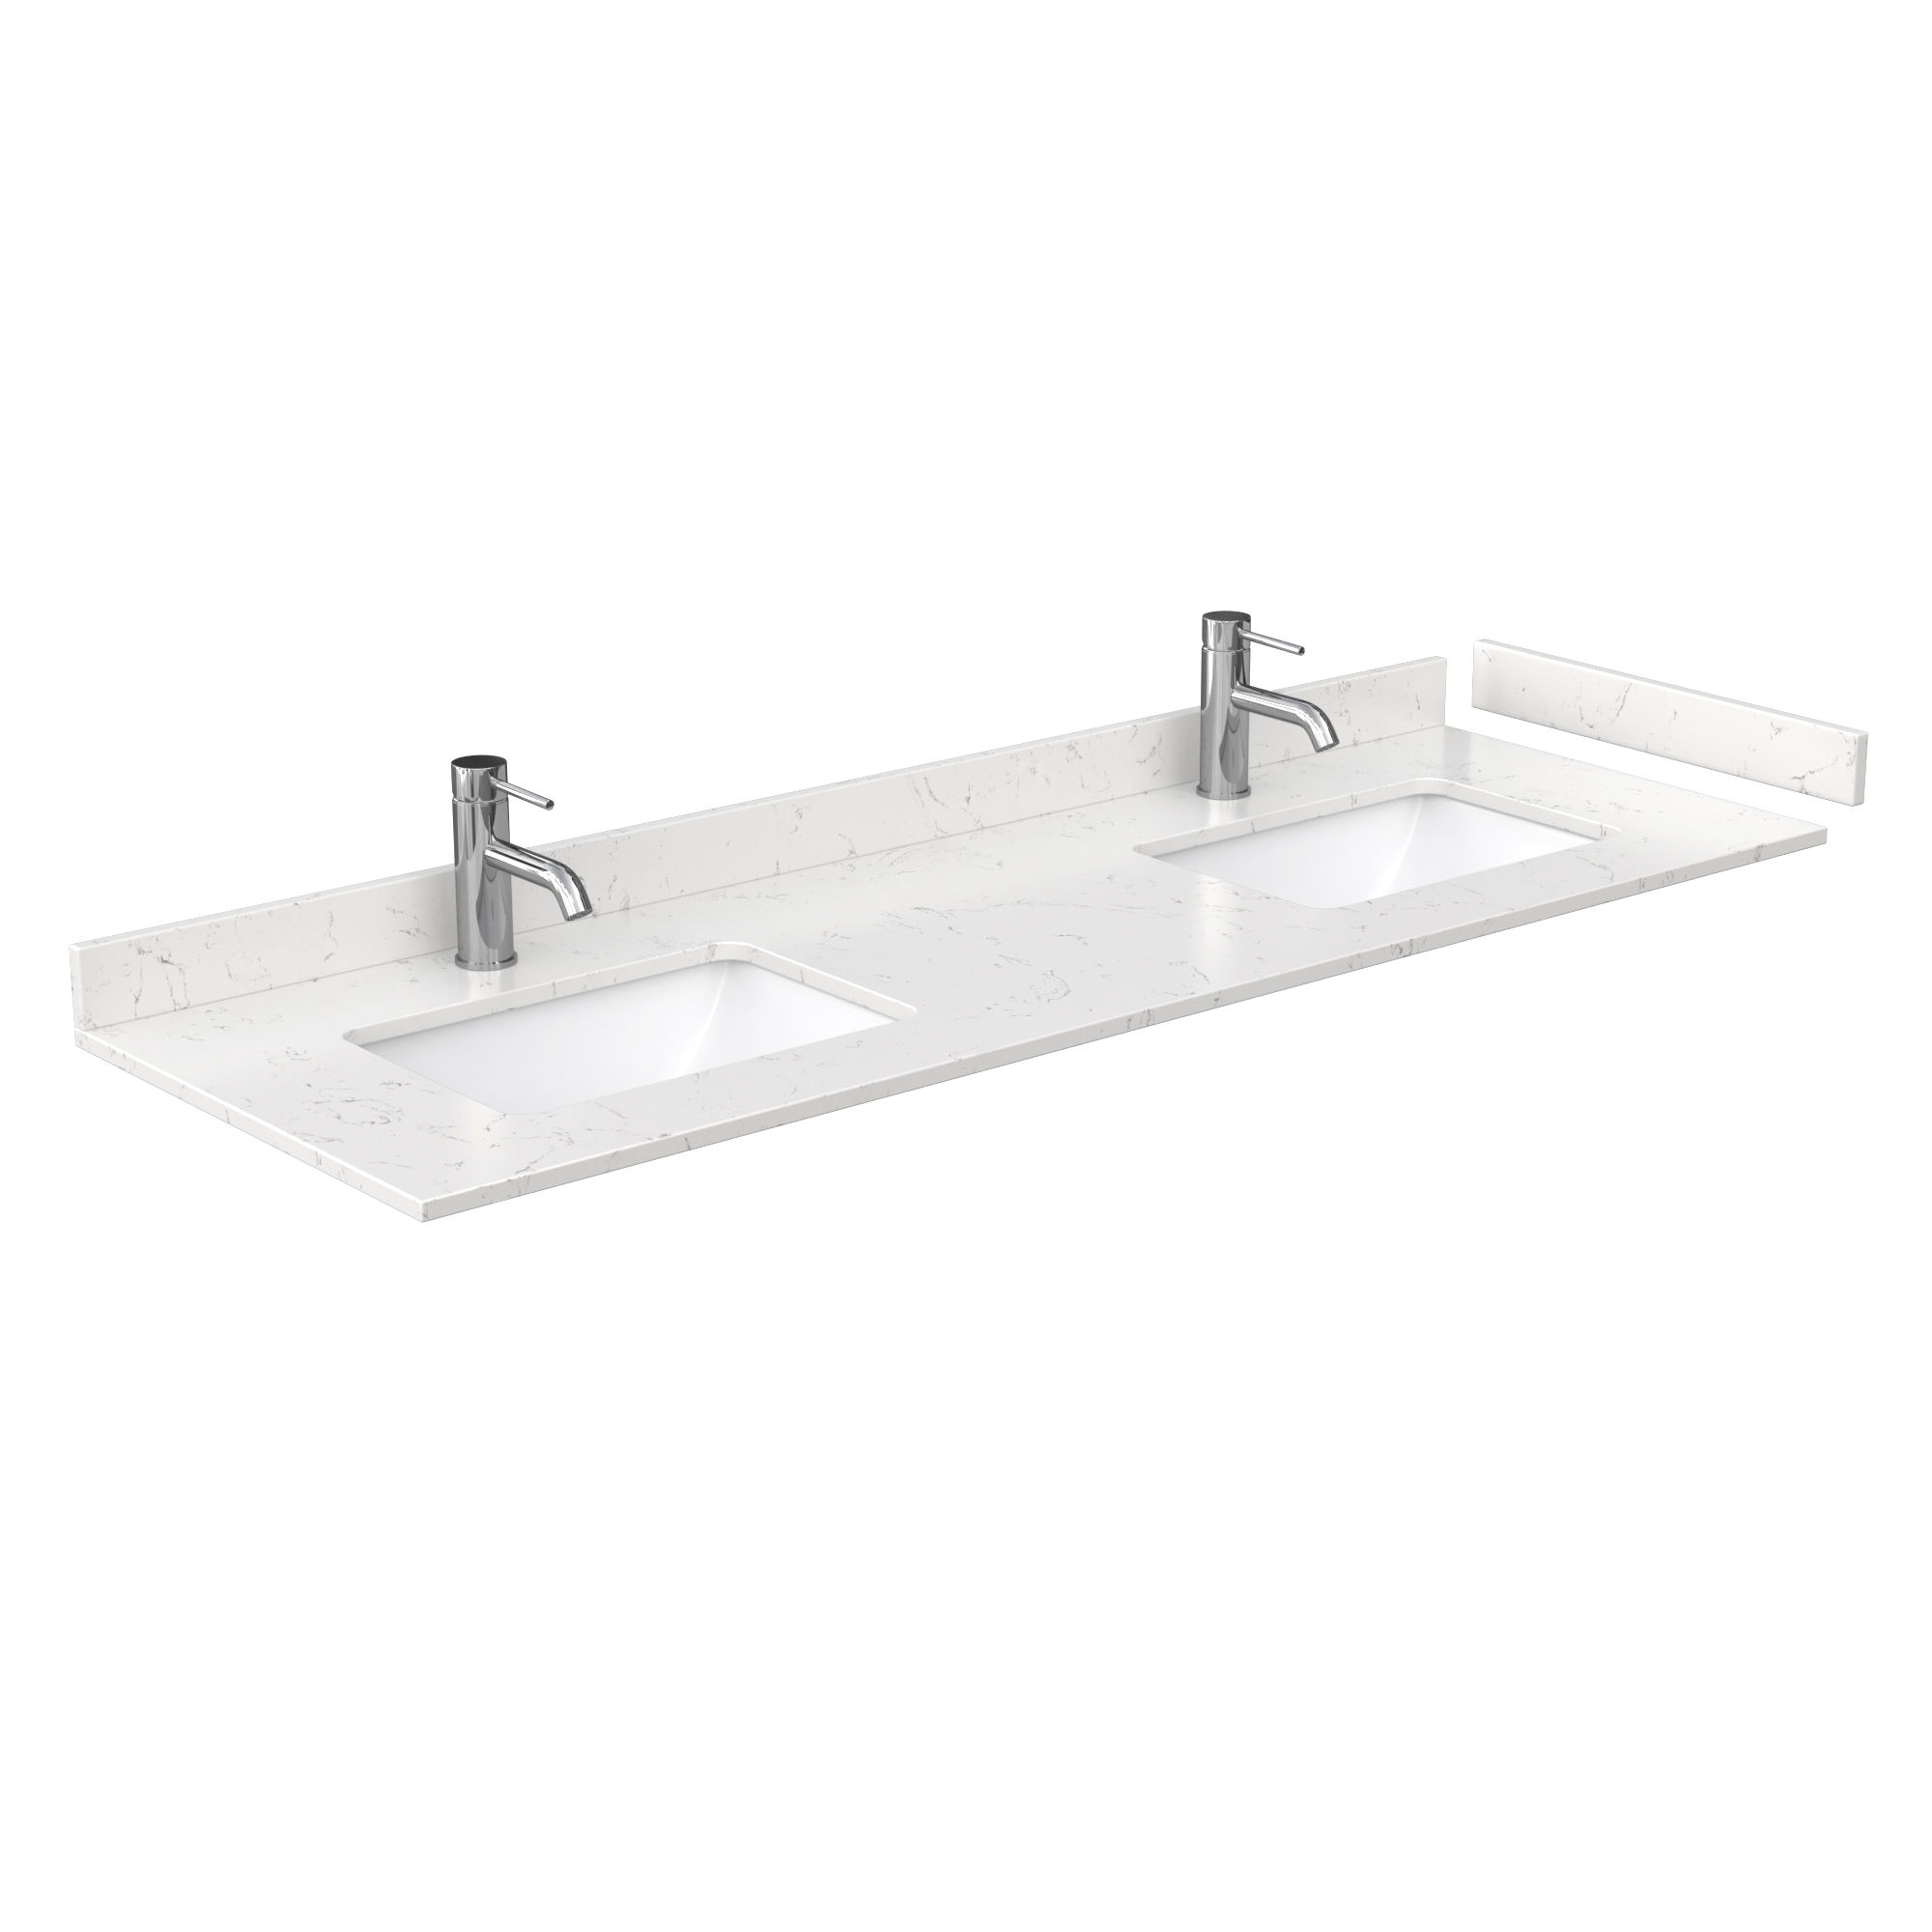 beckett 66" double bathroom vanity with toe kick, cultured marble counter - white